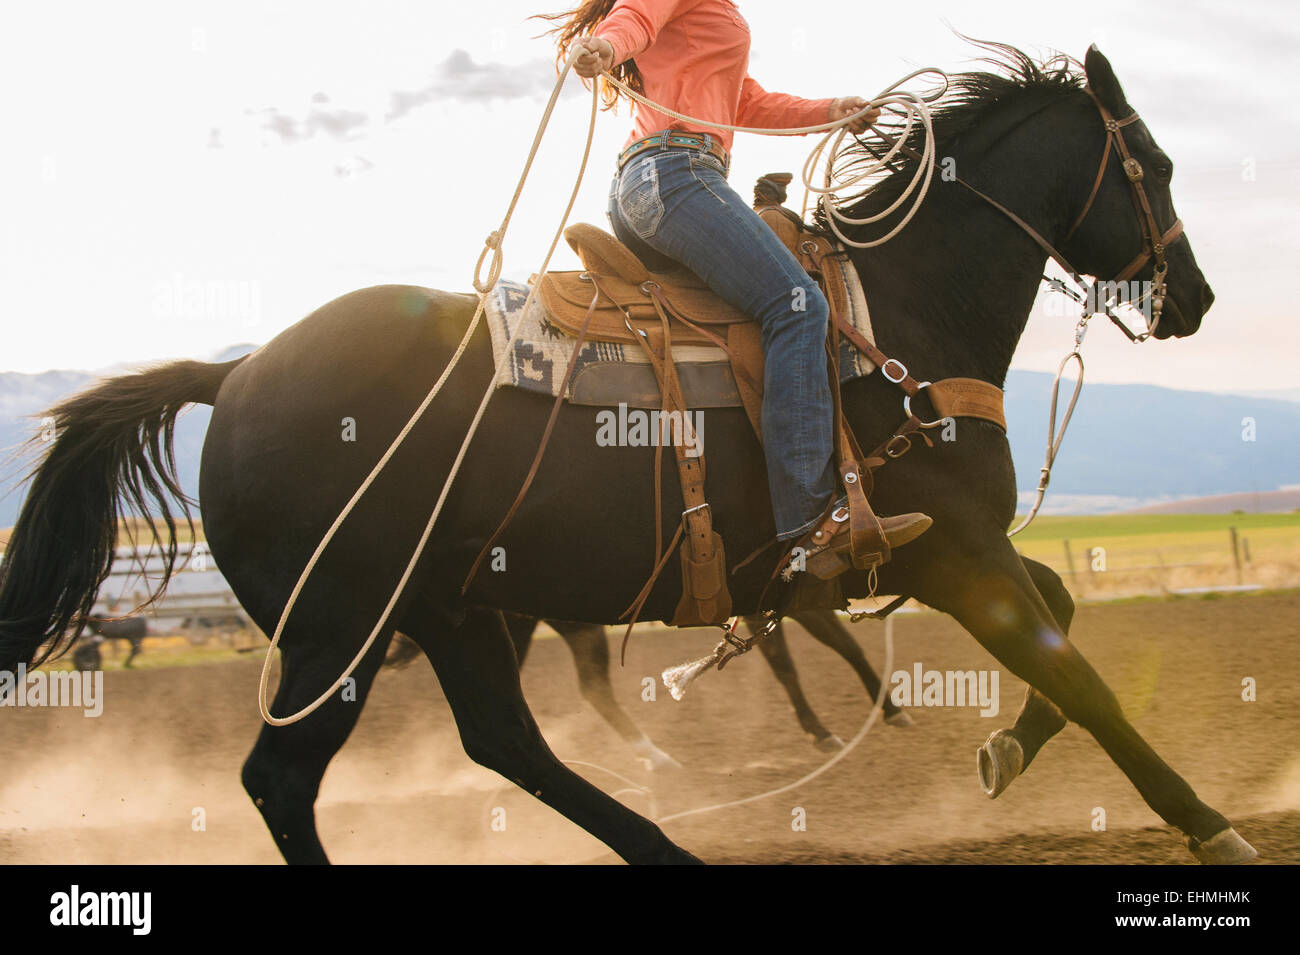 Caucasian woman on horse throwing lasso at rodeo Stock Photo